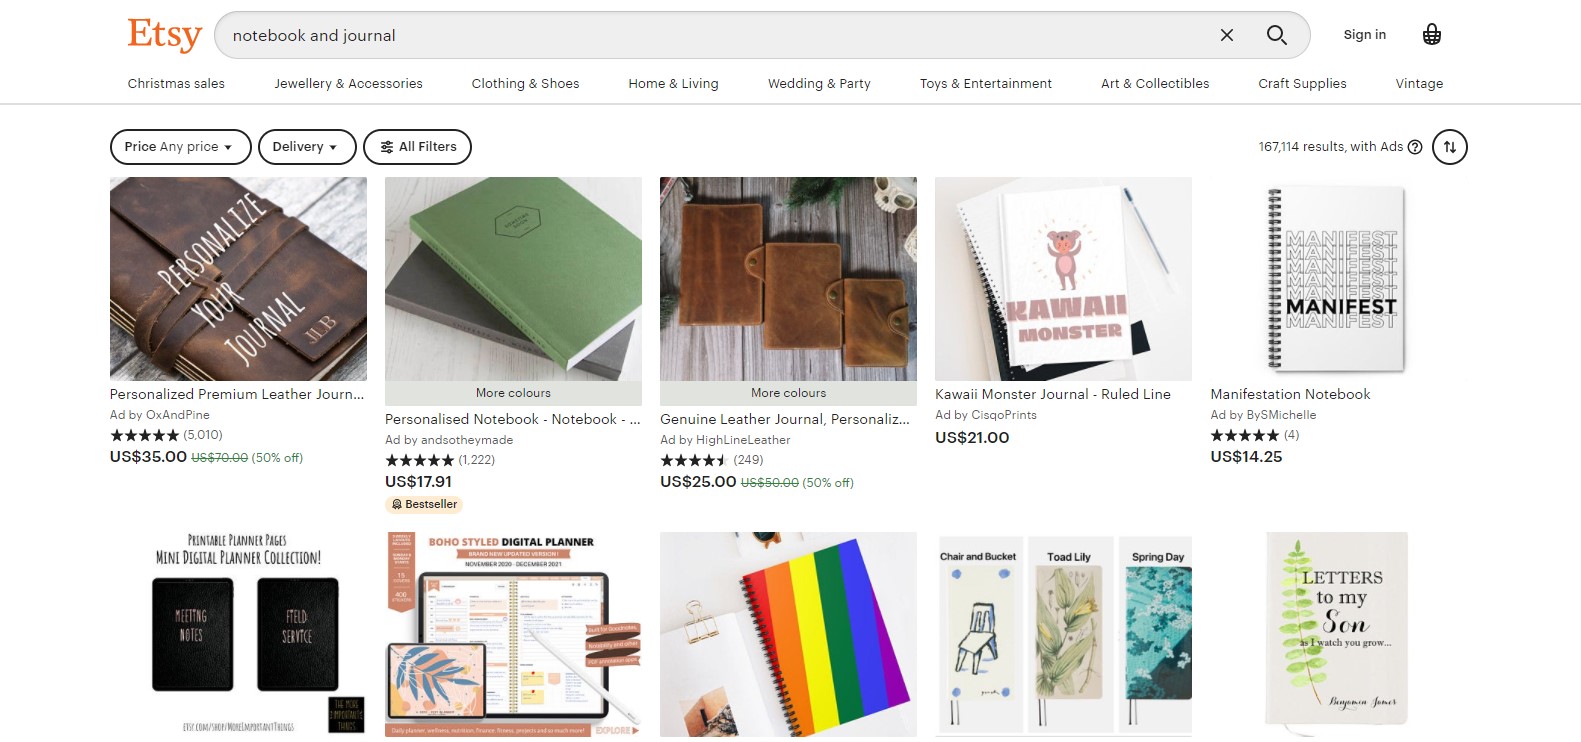 Notebook and journal - Top 10 Best Selling Items on Etsy